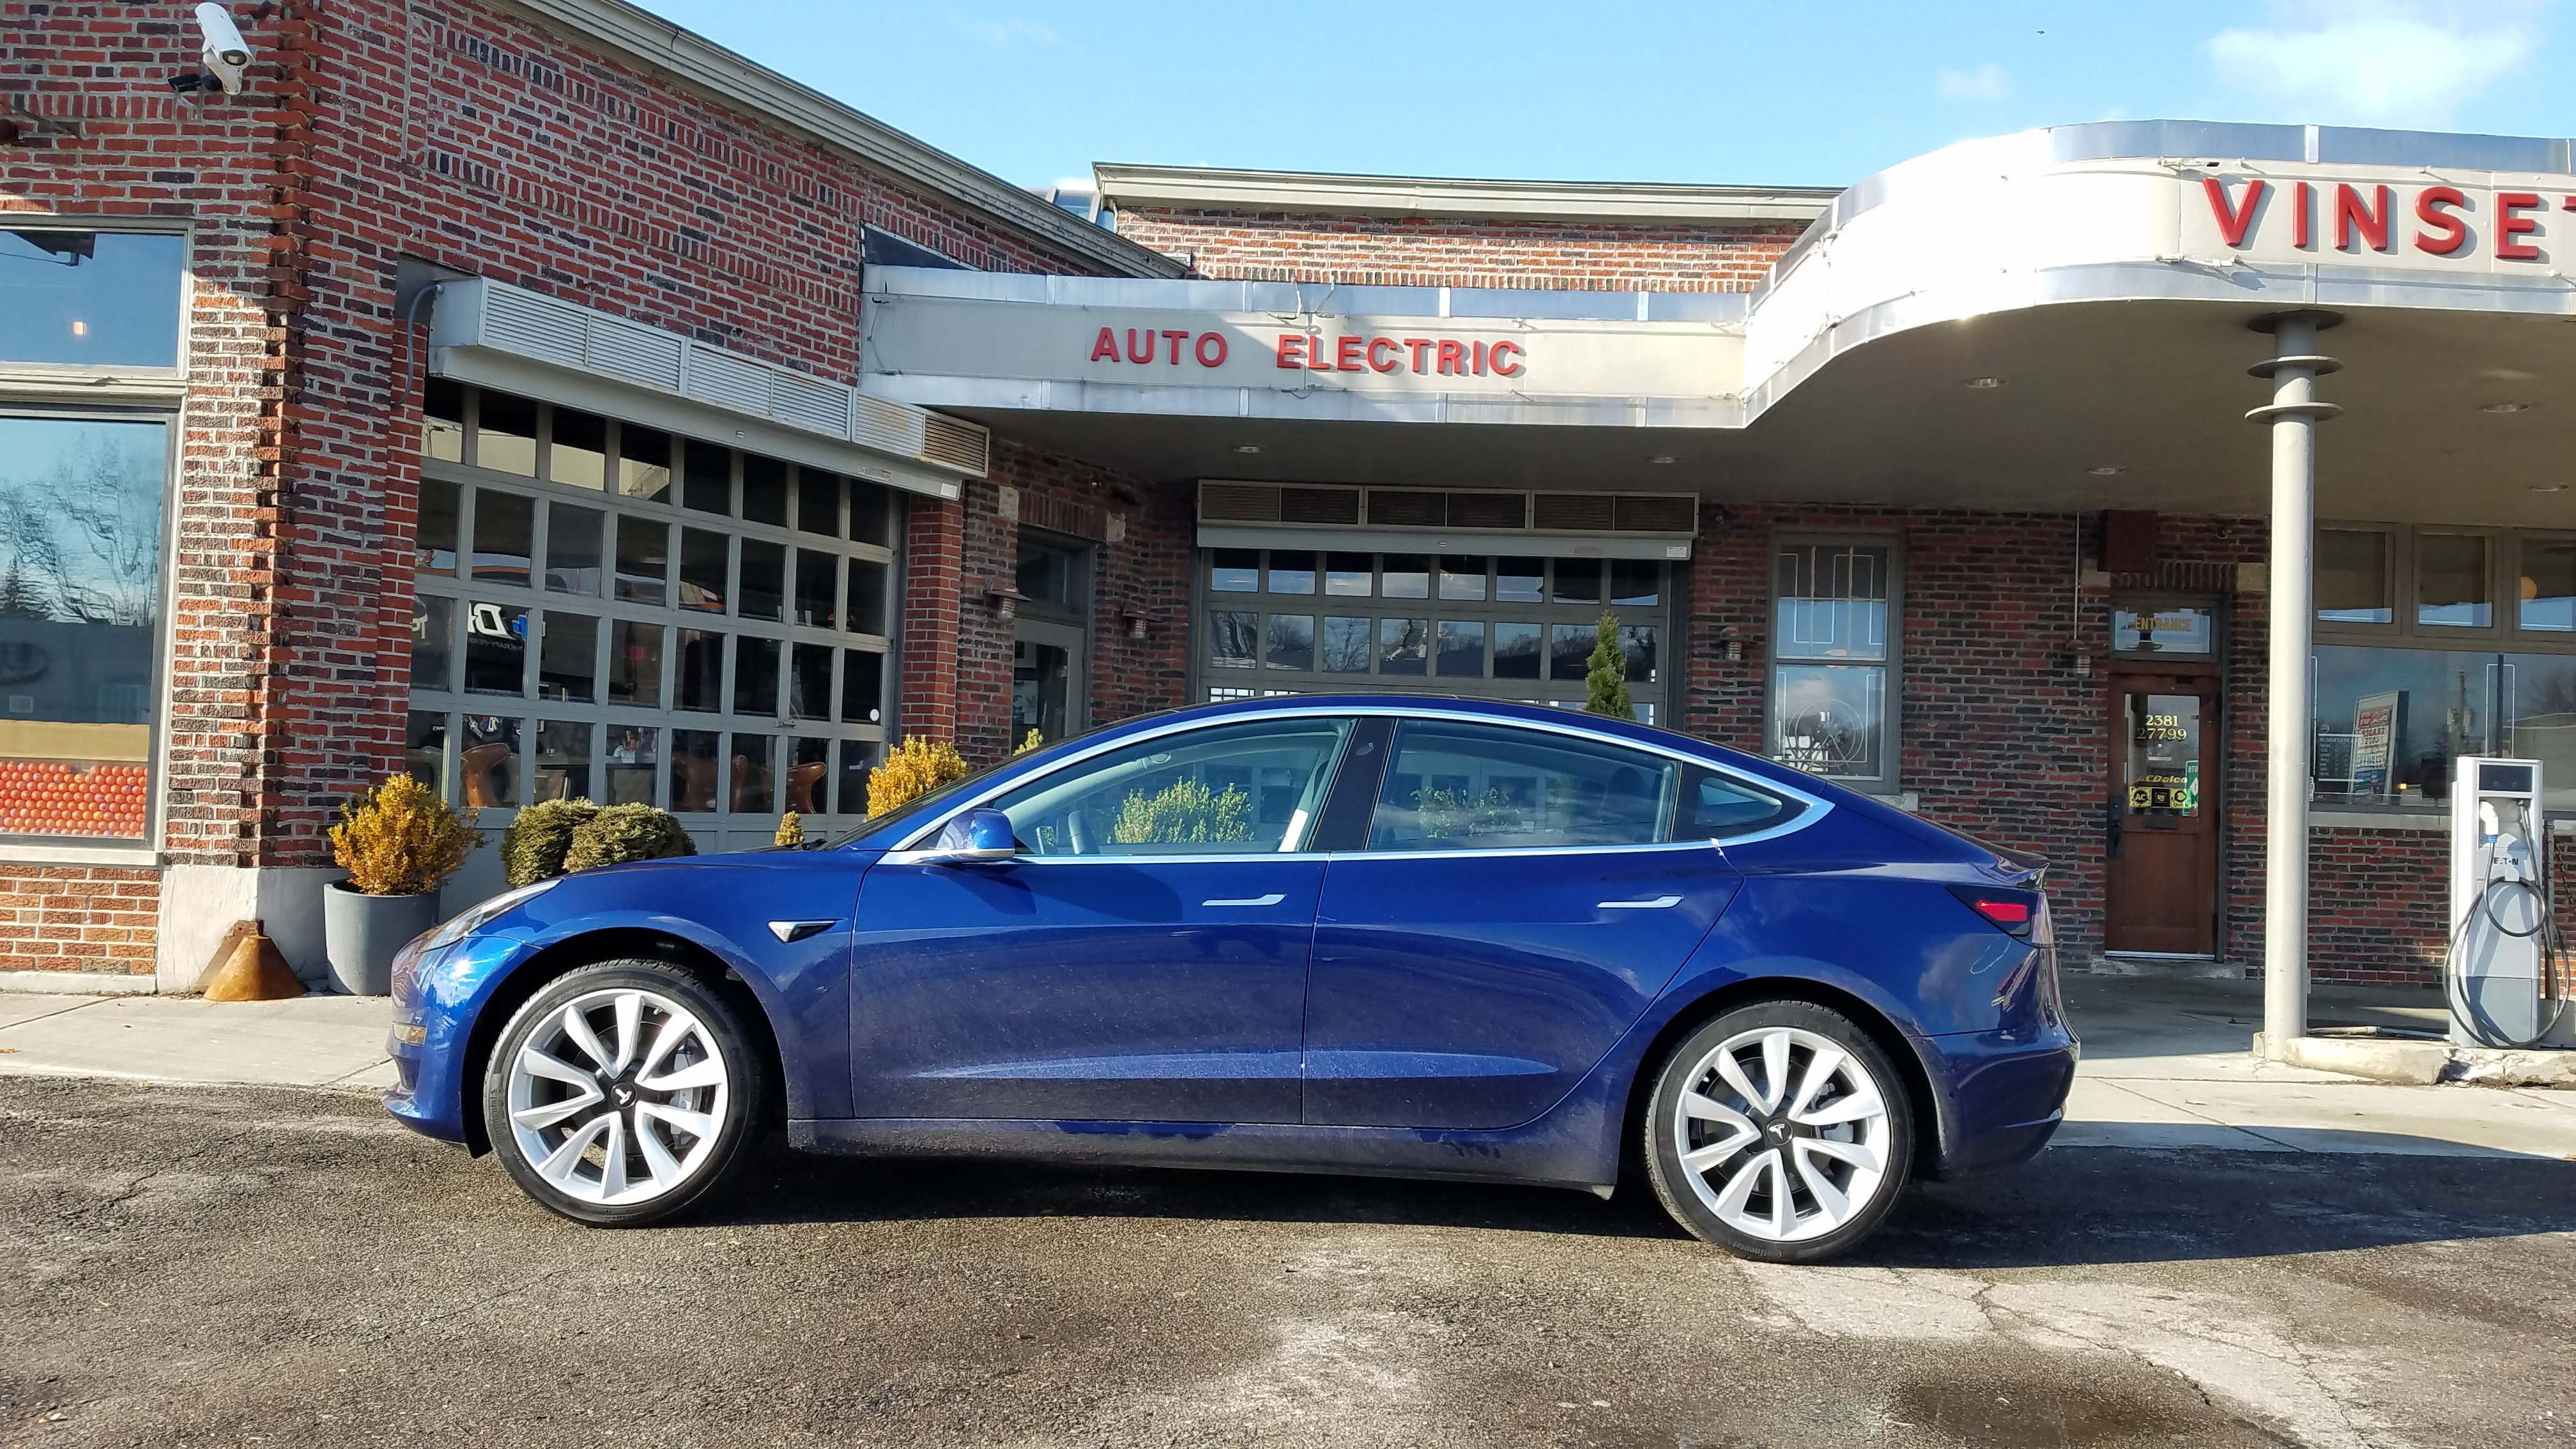 The winner of The Detroit News Vehicle of the Year is the Tesla Model 3, which sports a sleek sportback profile similar to the longer Model S. The 3 starts at $35,000 — the S starts at $74,500.